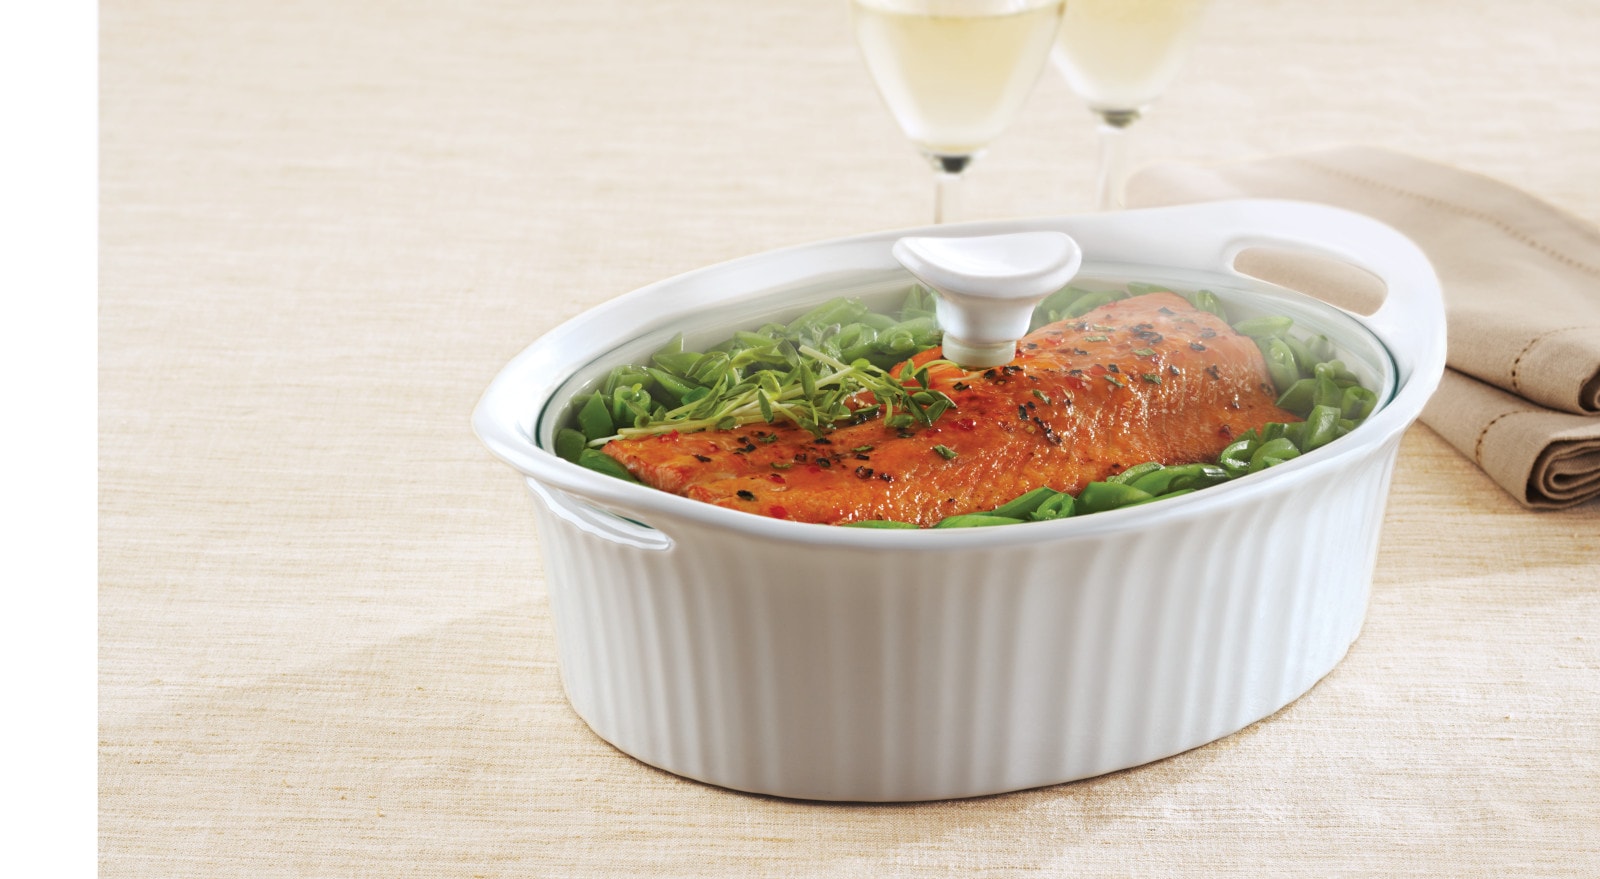 Corningware Entree Baker, Round, with Glass Cover, French White, 1.5 qt - 2 pieces